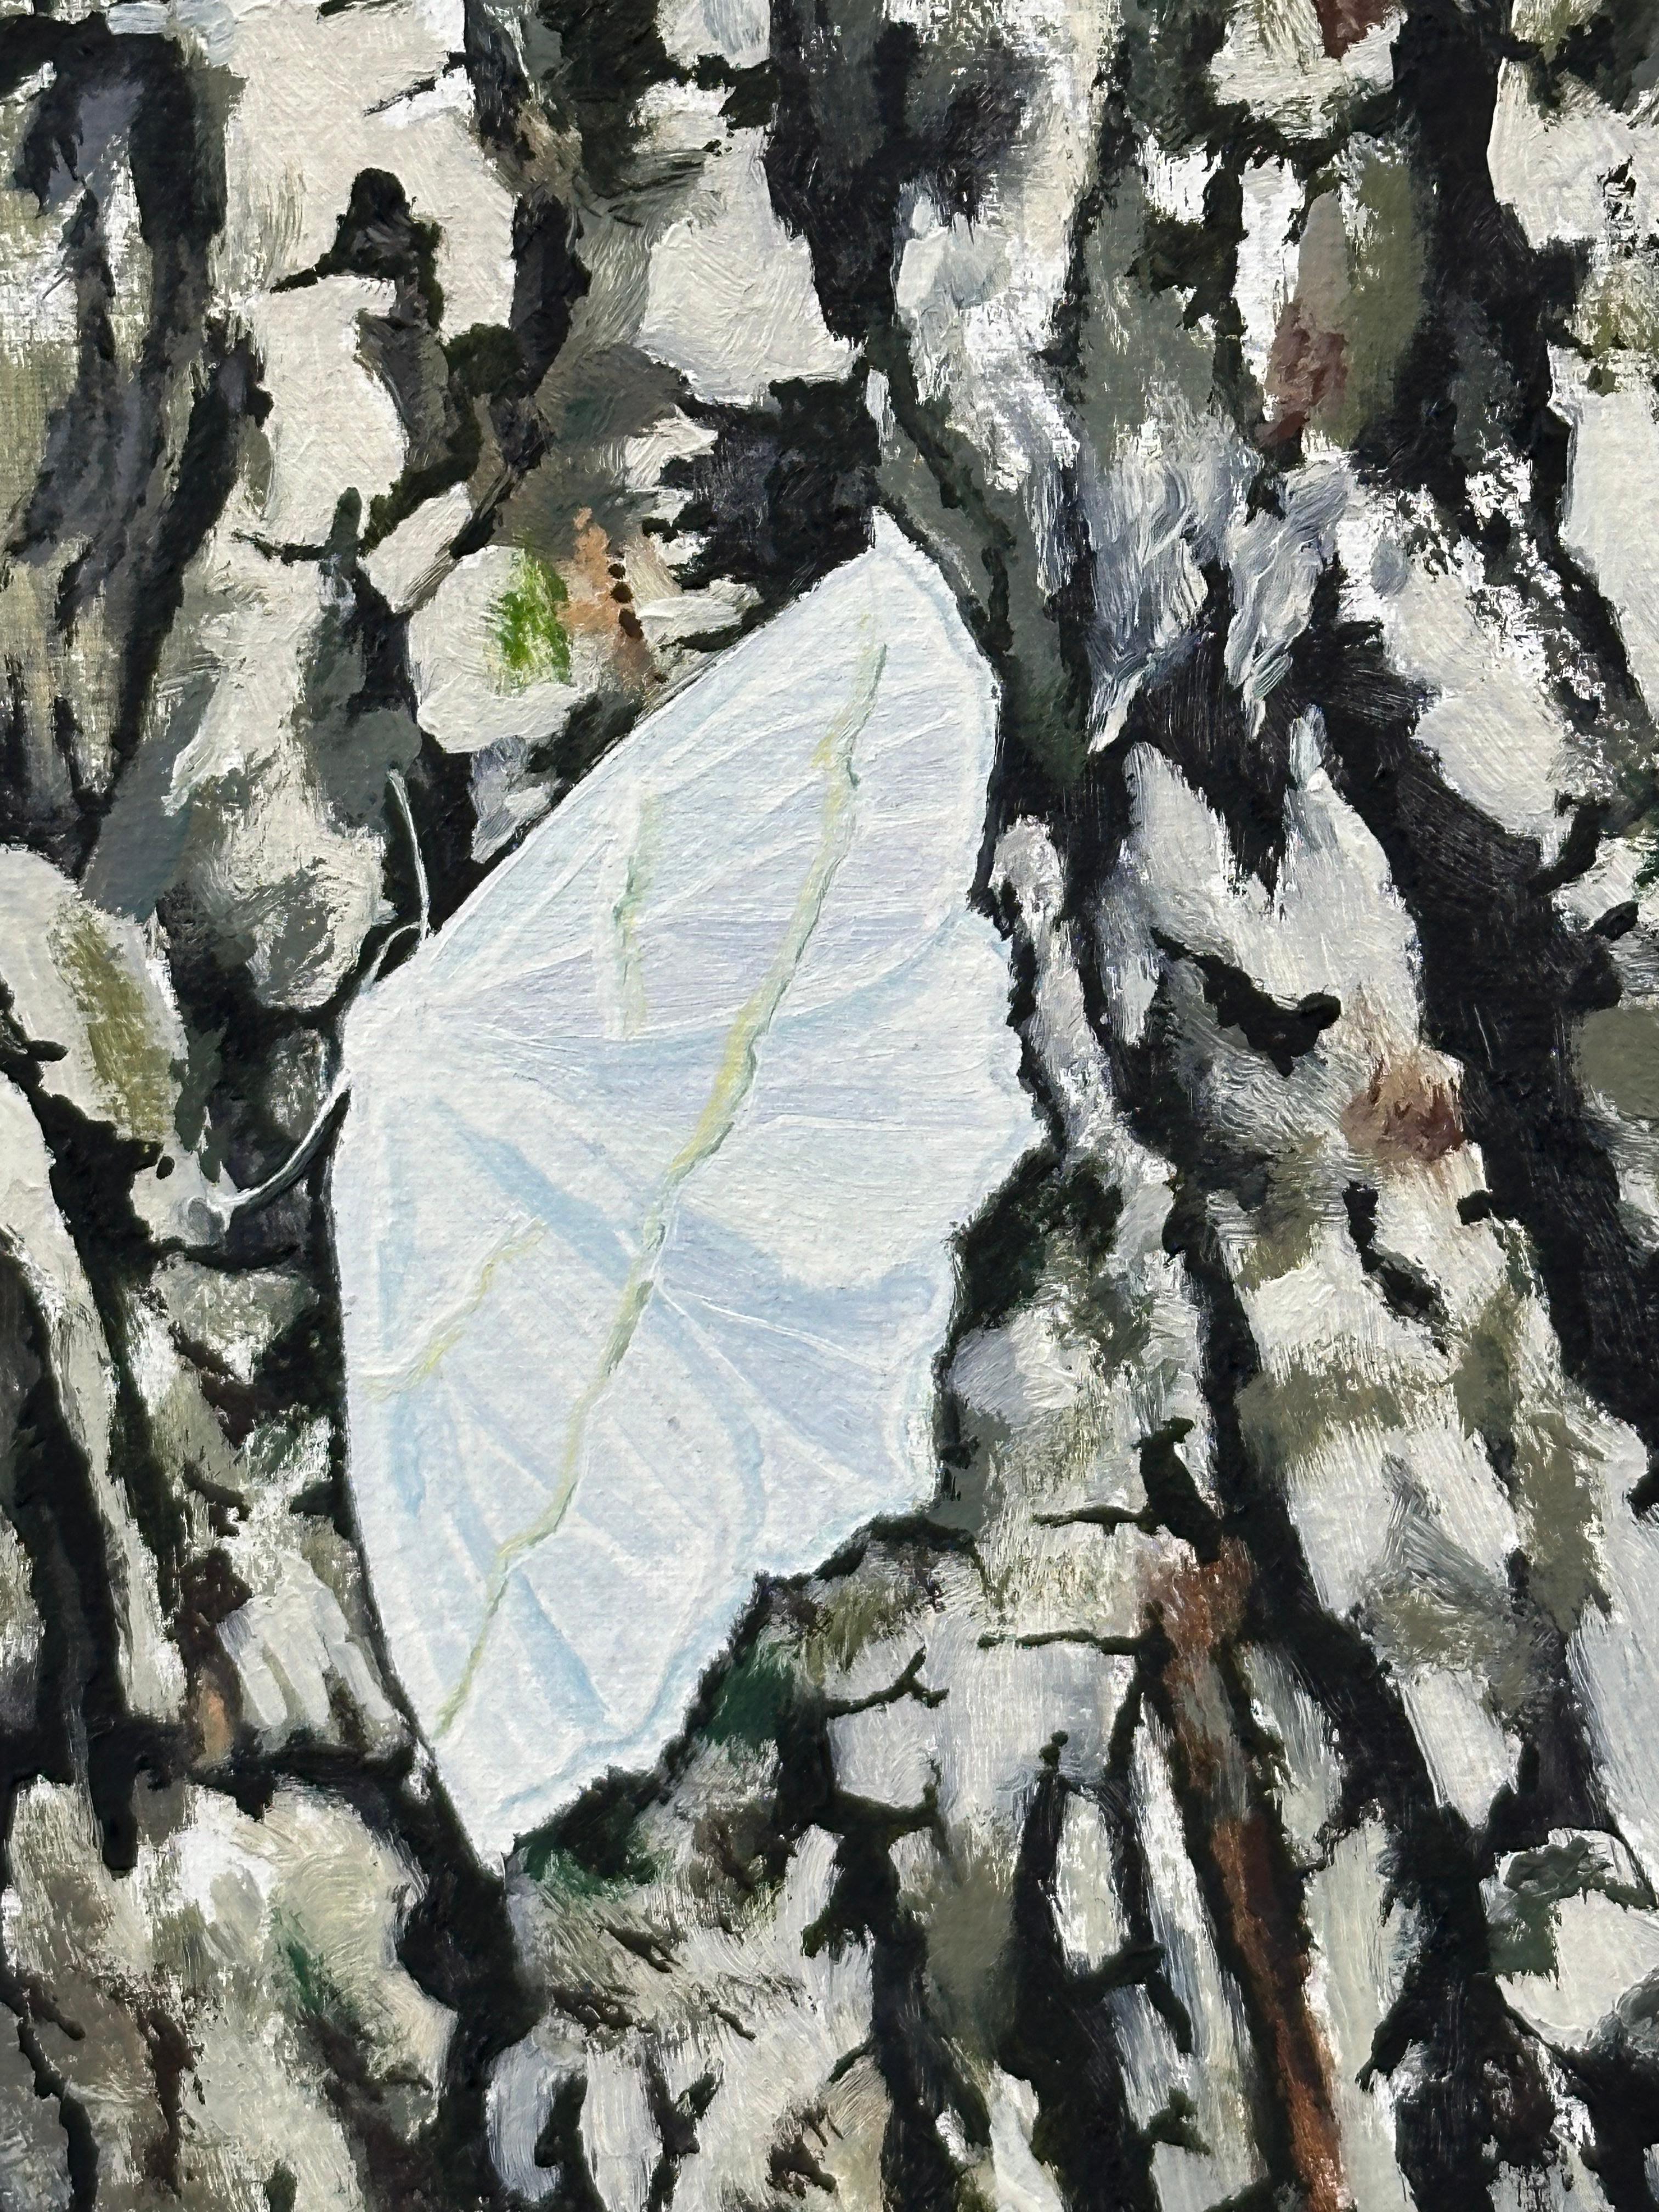 A luminous, bright white winged moth is perched on the side of a tree with gray beige tree bark. Signed, dated and titled on verso.

Amanda Acker’s nuanced oil paintings on panel give a glimpse into moments and spaces from real life. The result is